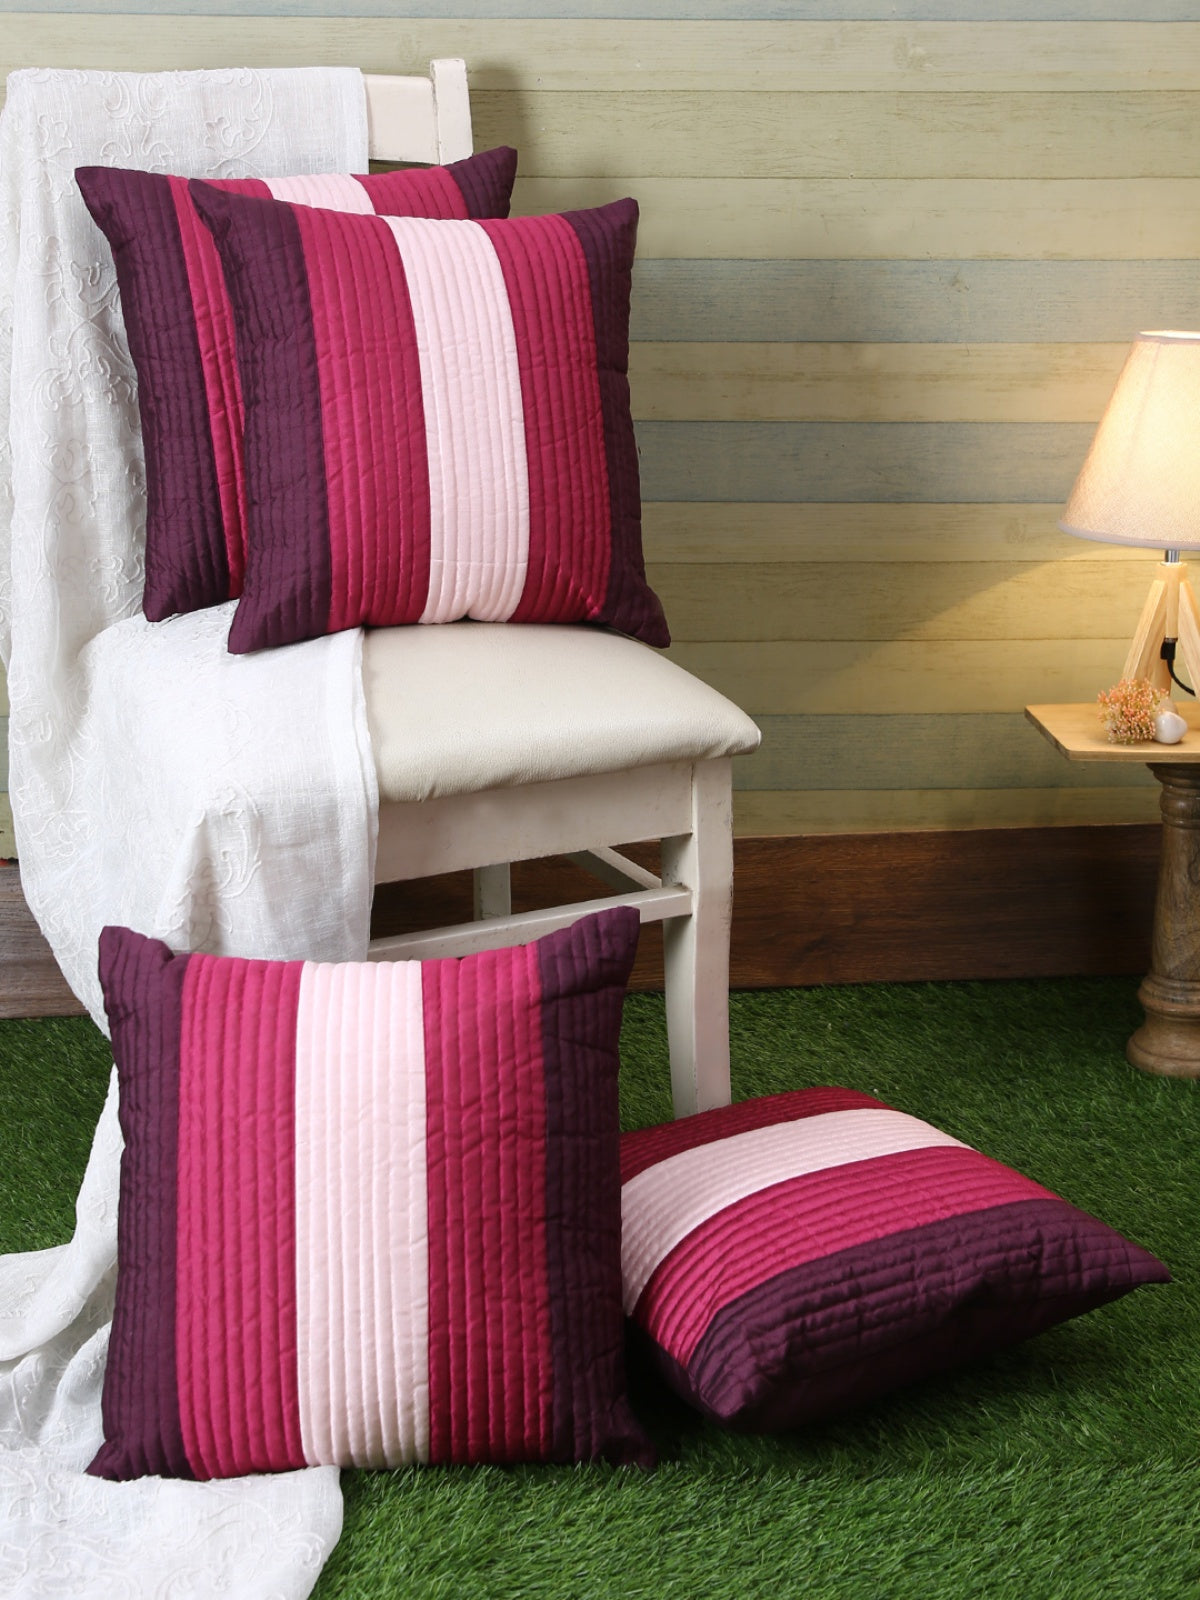 Striped Printed Polyester Cushion Cover Set of 5 - Pink & Purple